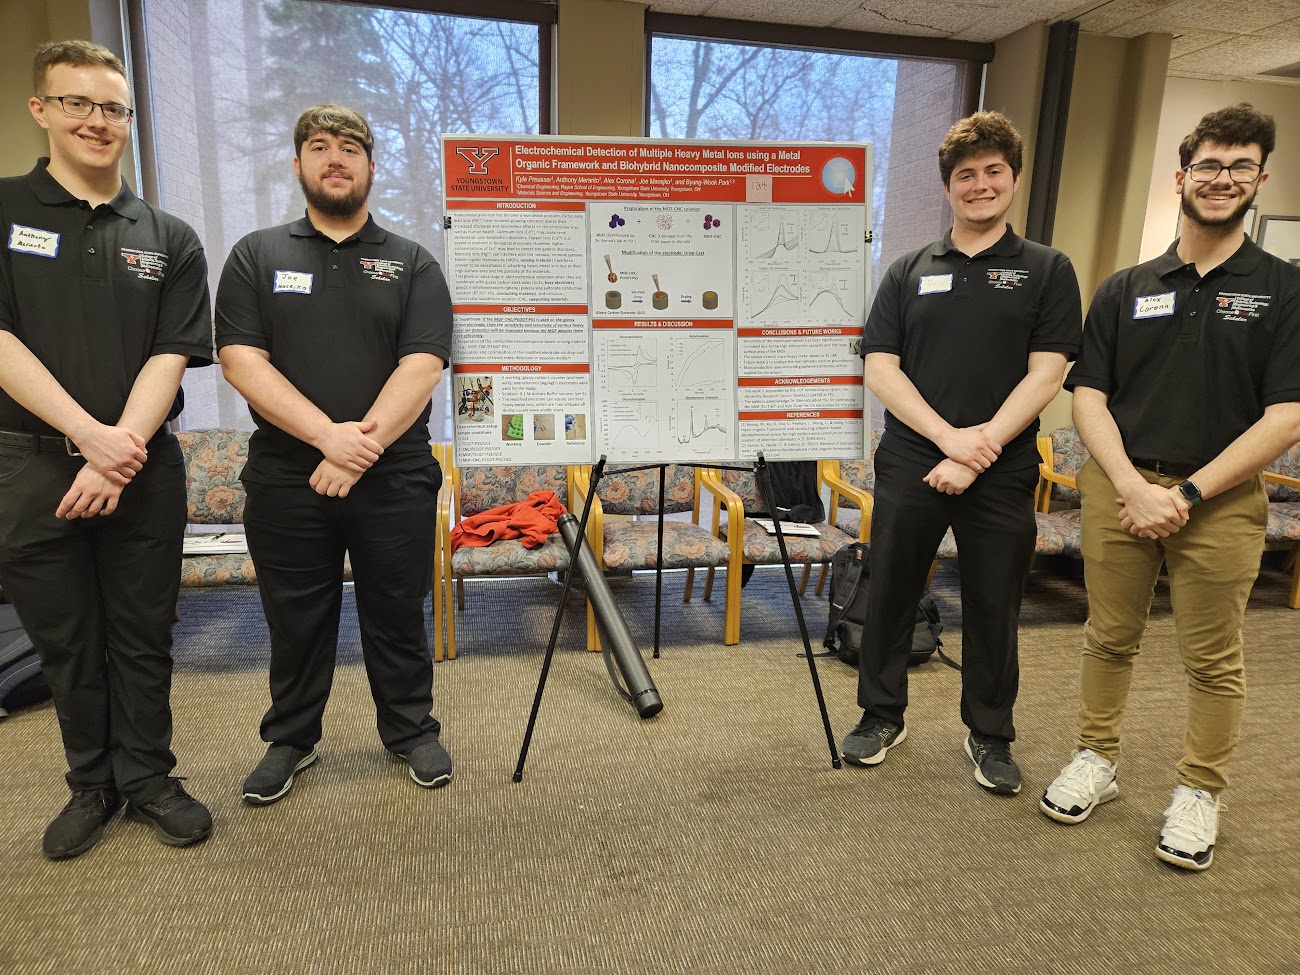 A research team poses by their research poster at QUEST